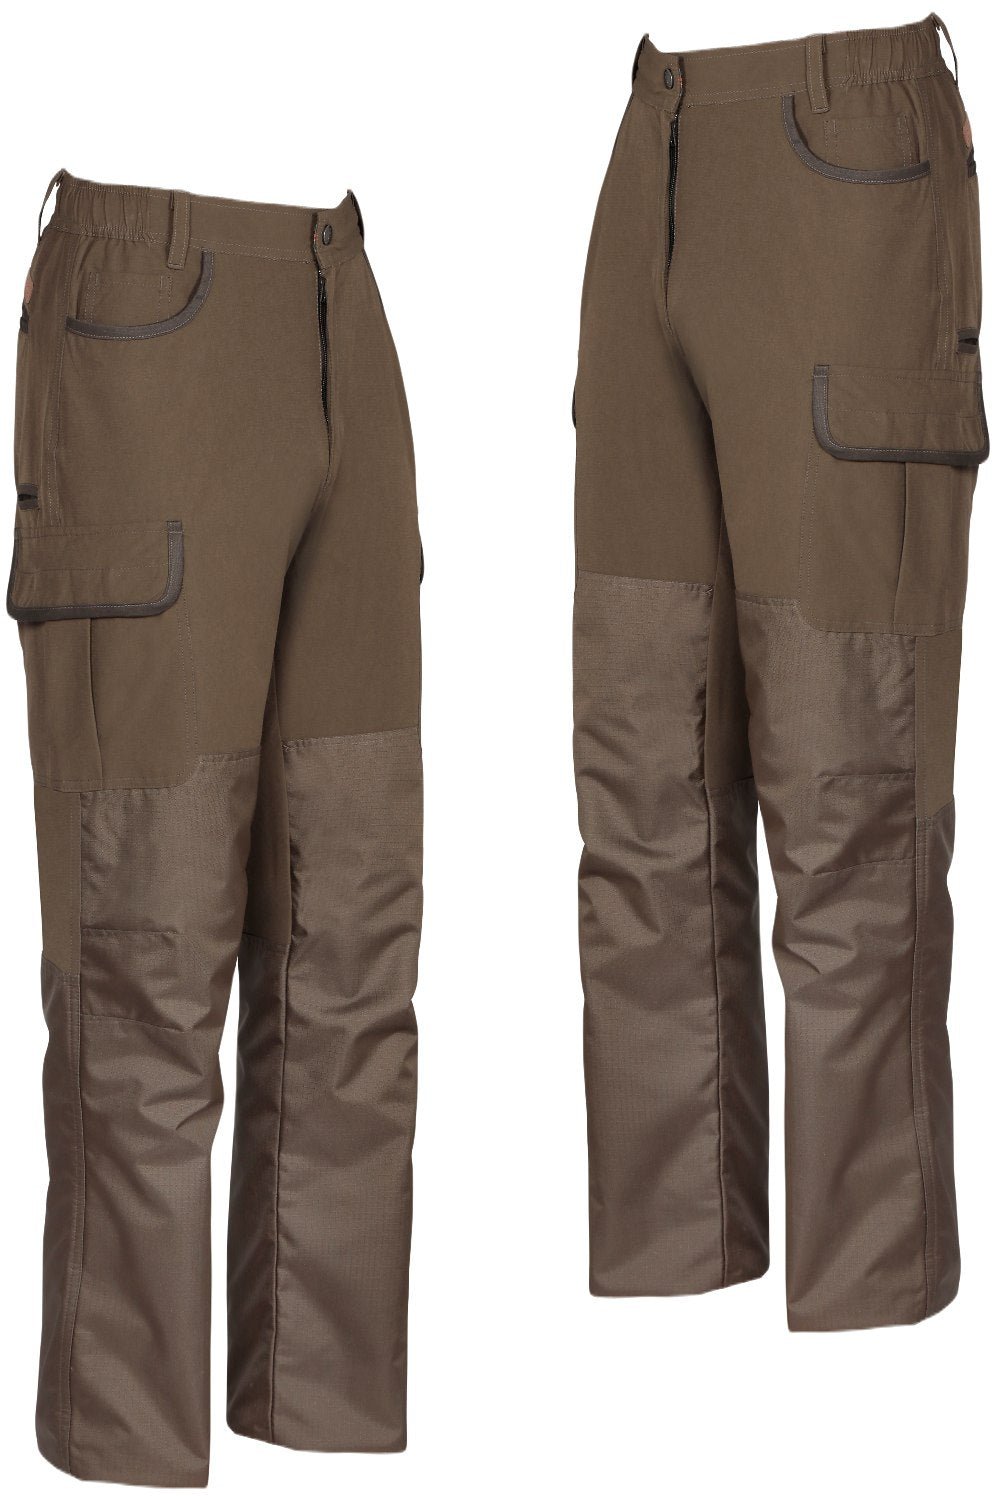 Percussion Savane Reinforced Hyperstretch Trousers in Khaki